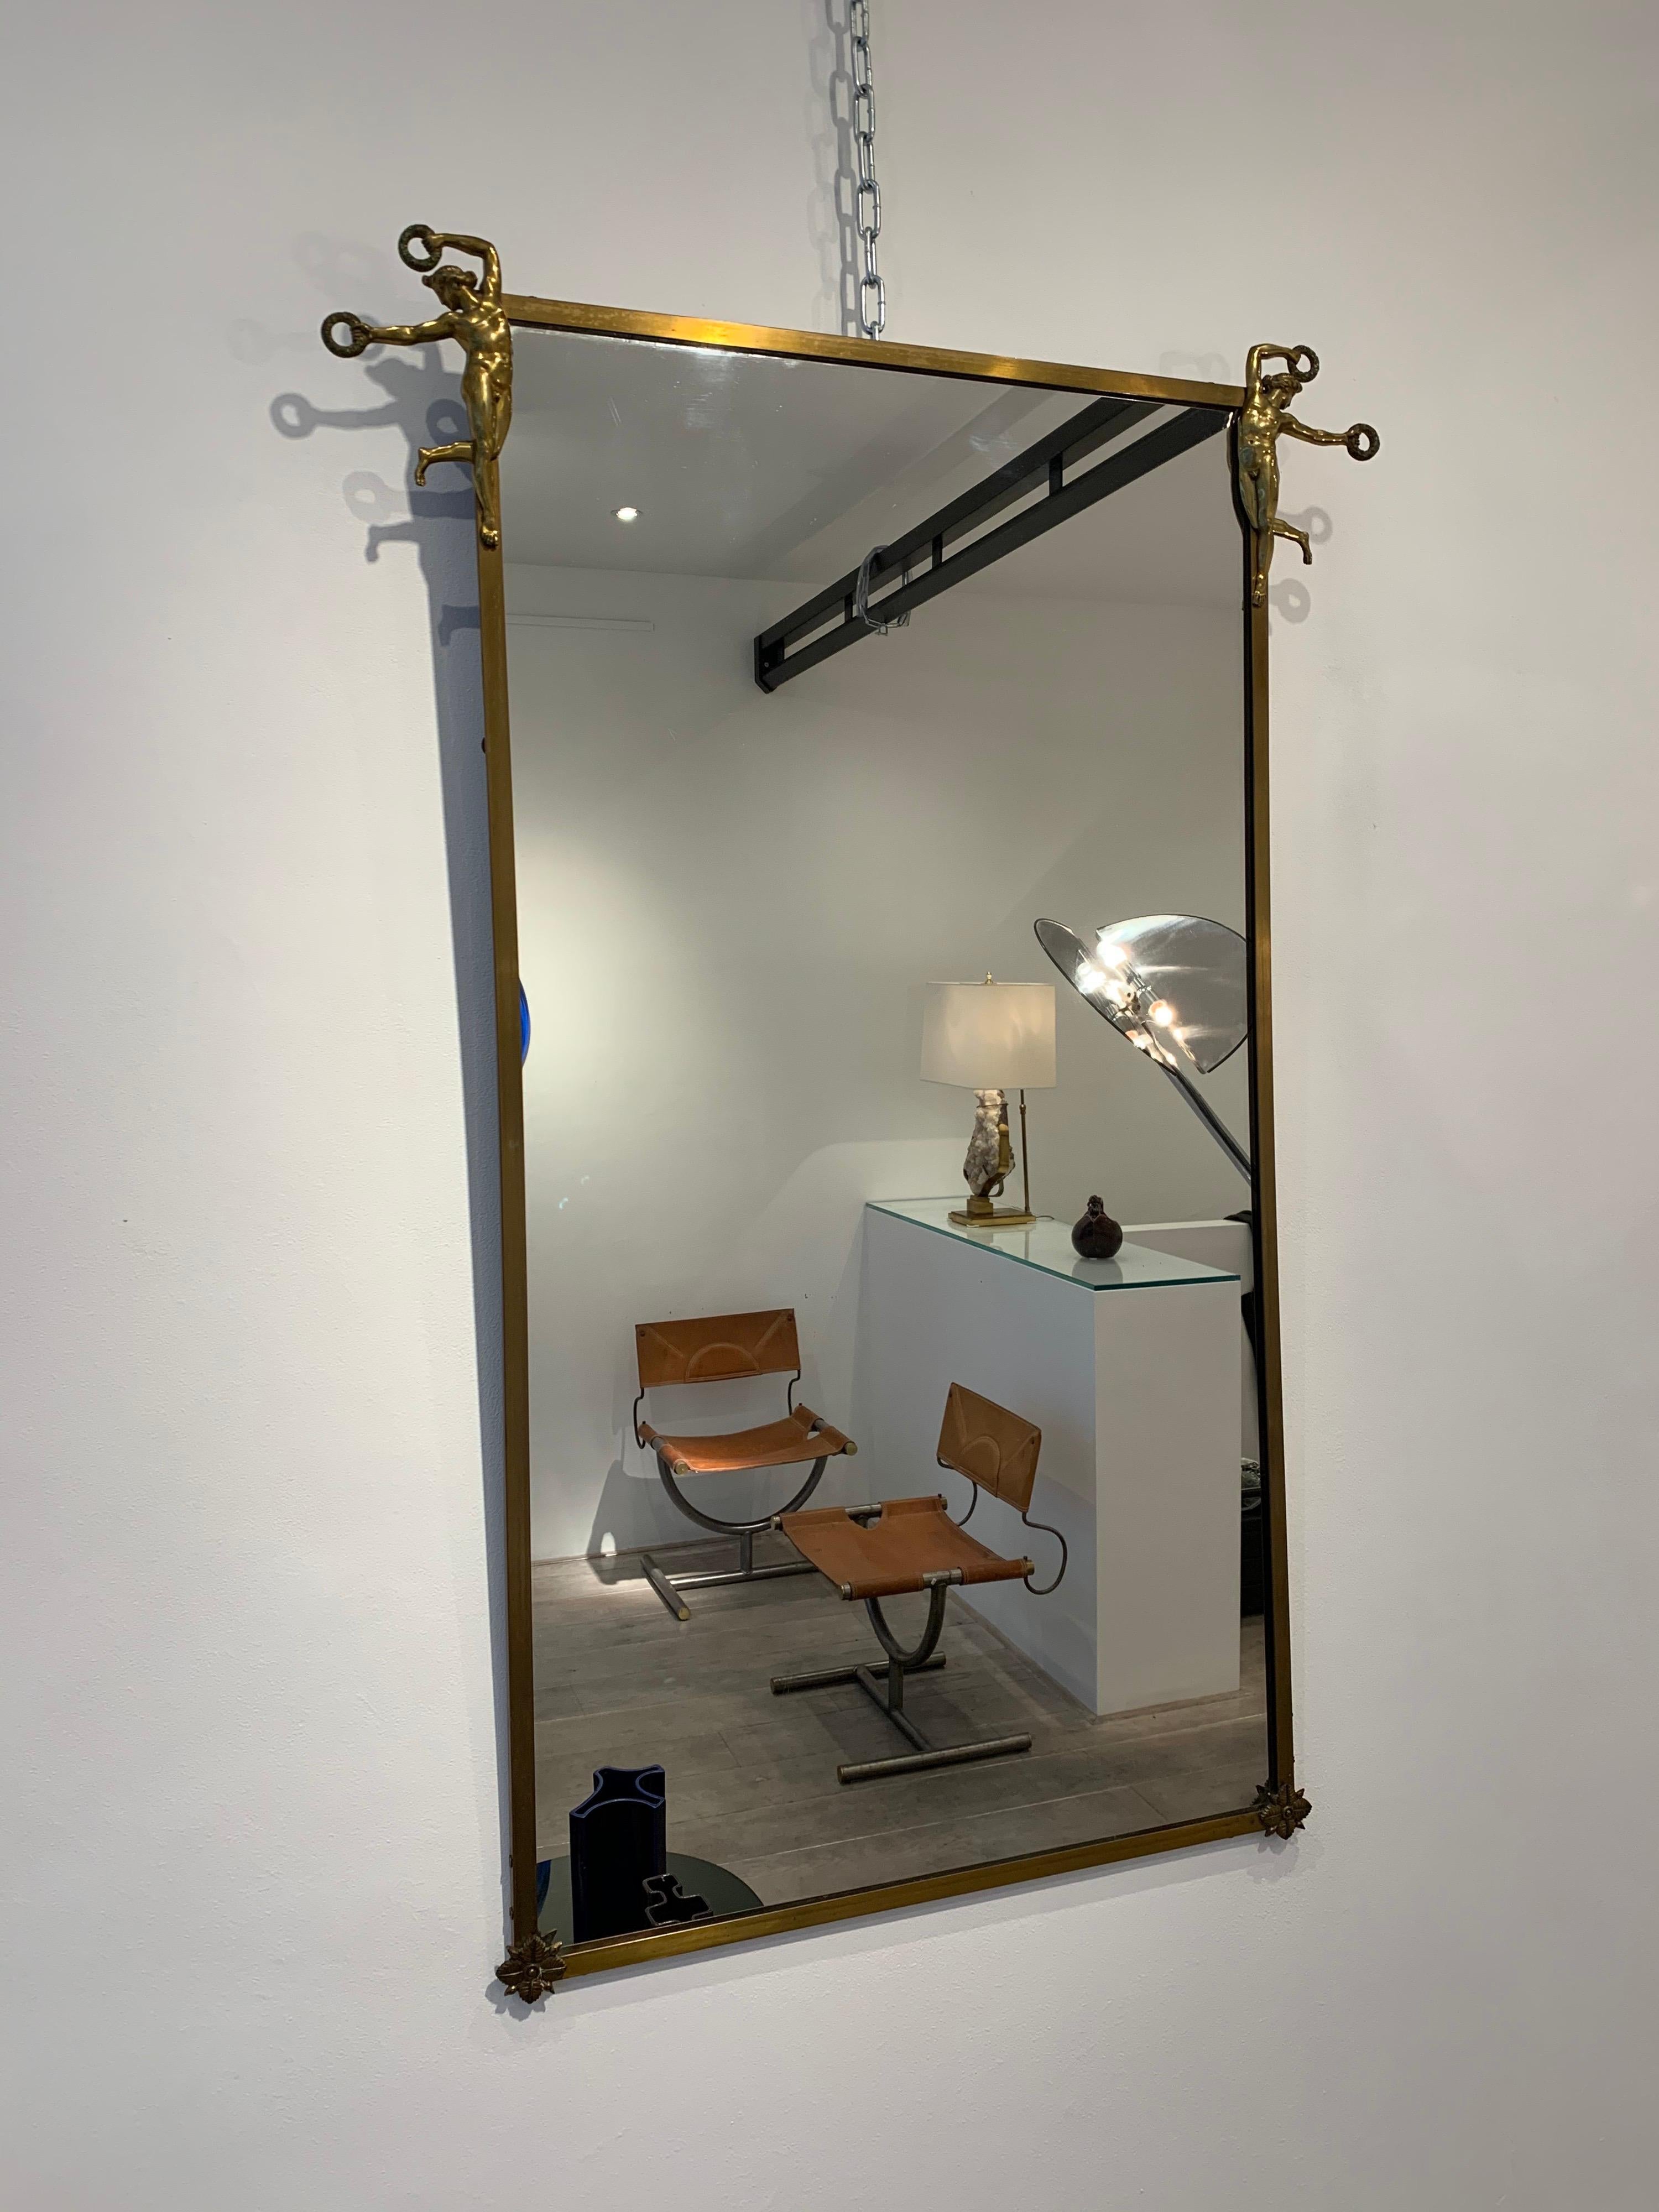 An elegant brass mirror with crowning at top Appollos and flowers decoration at bottom corners. The mirror is probably from French neoclassic inspiration, a style that was fully revived in the 1940s. The quality of the applied Appollos is beautiful.